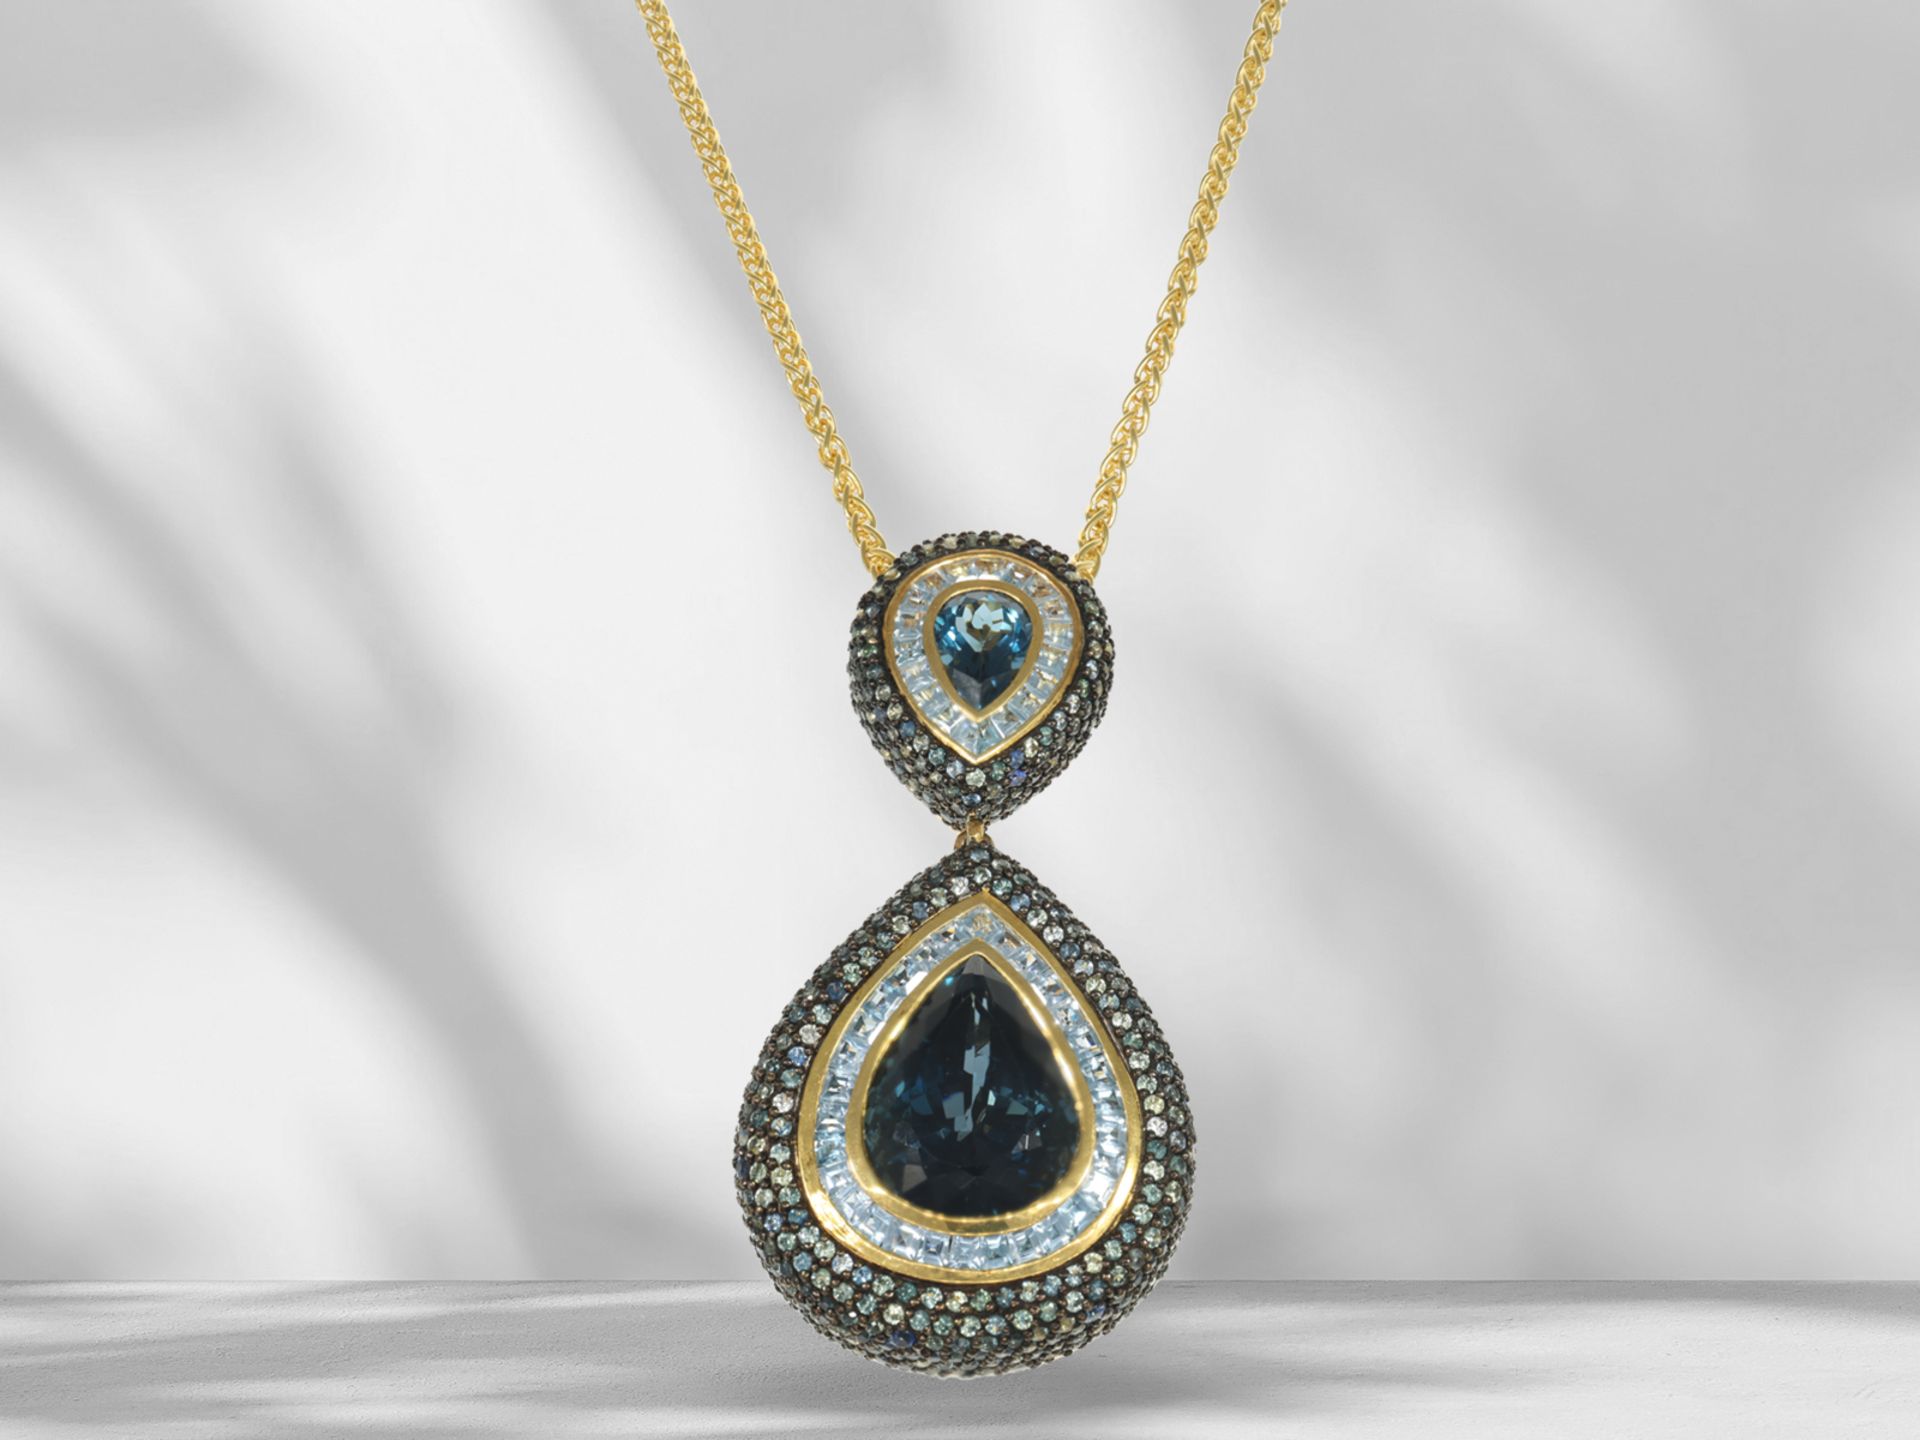 Fancy, like new designer necklace set with topazes and sapphires